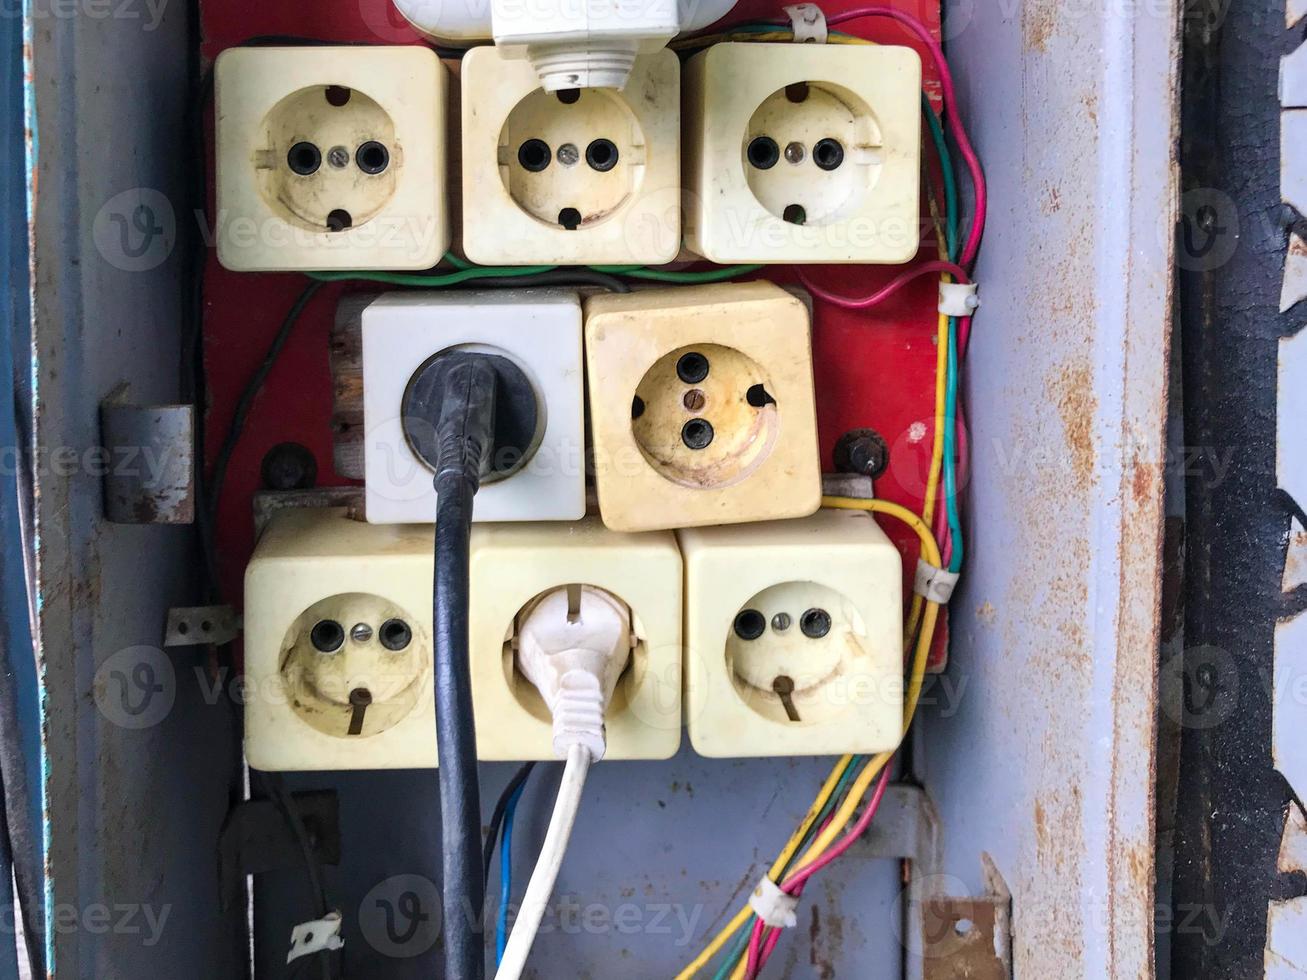 switch box. homemade shield with sockets for power lines. providing the house with light and heat. do it yourself wires. building a house in the village, many white sockets in a gray panel with wires photo